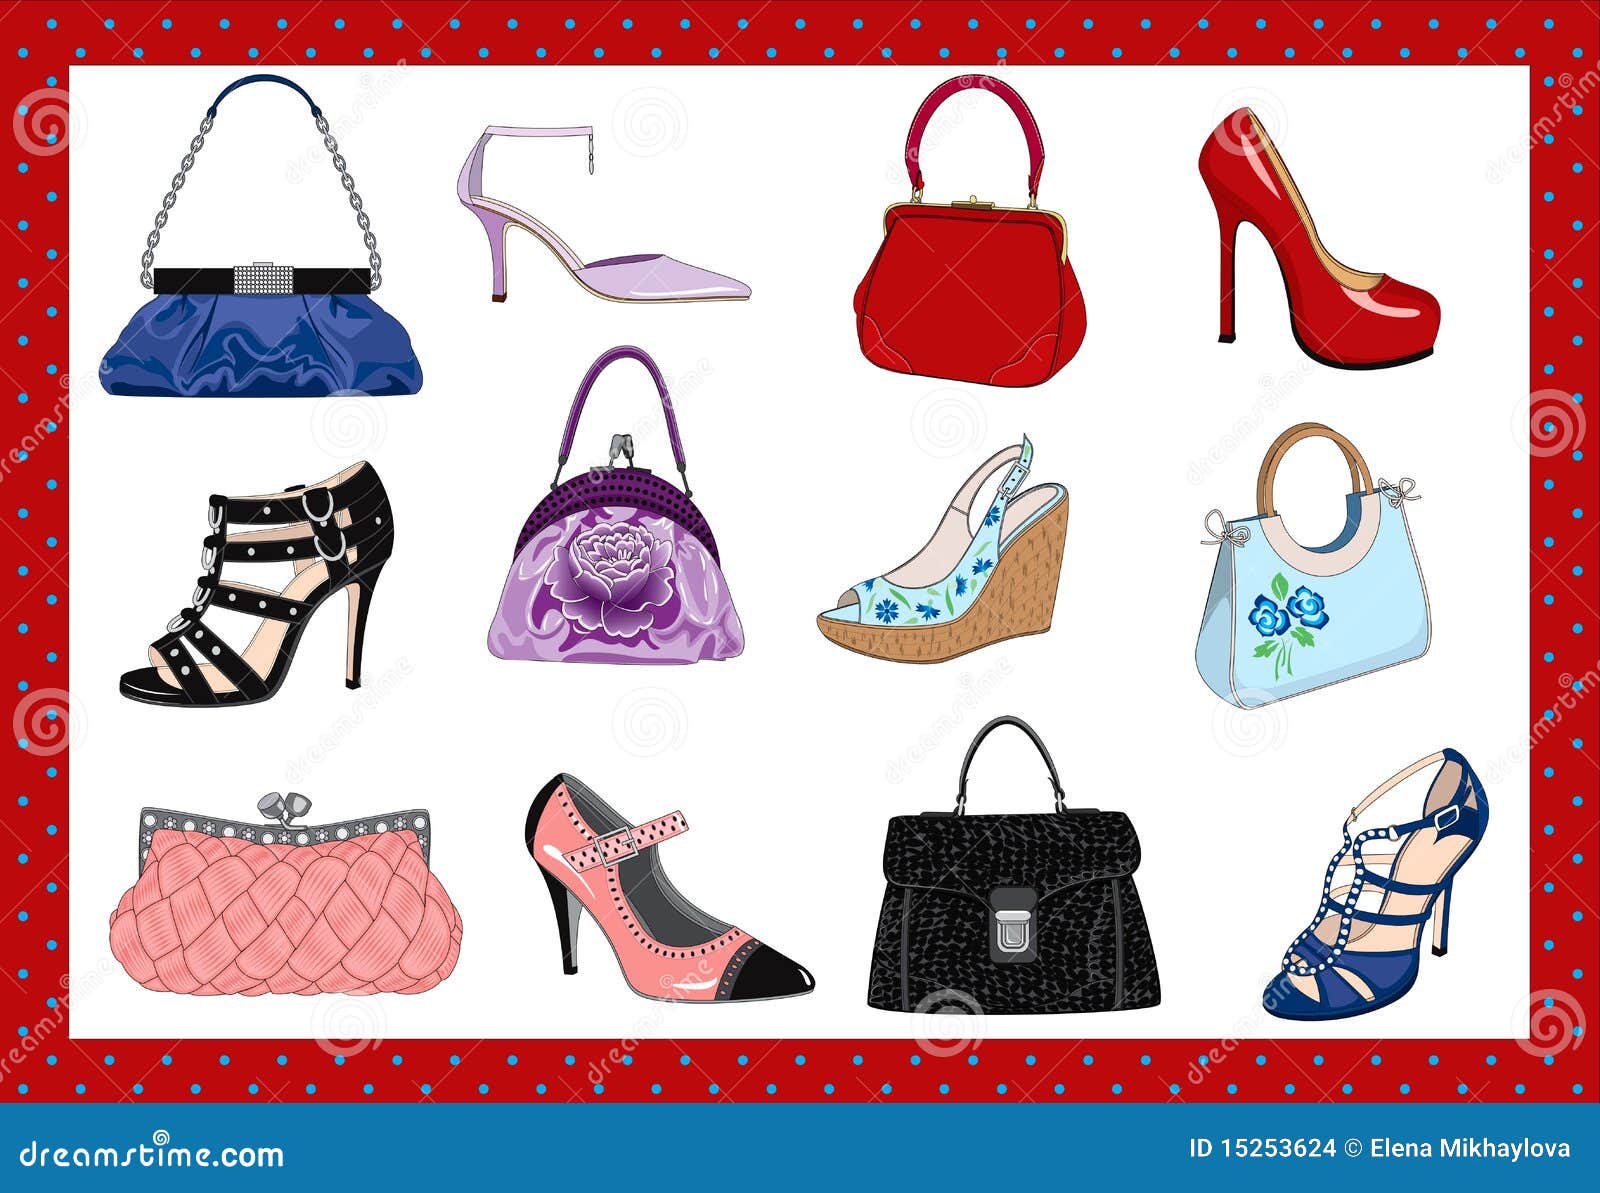 Ladies bags and shoes on a white background - vector illustration.